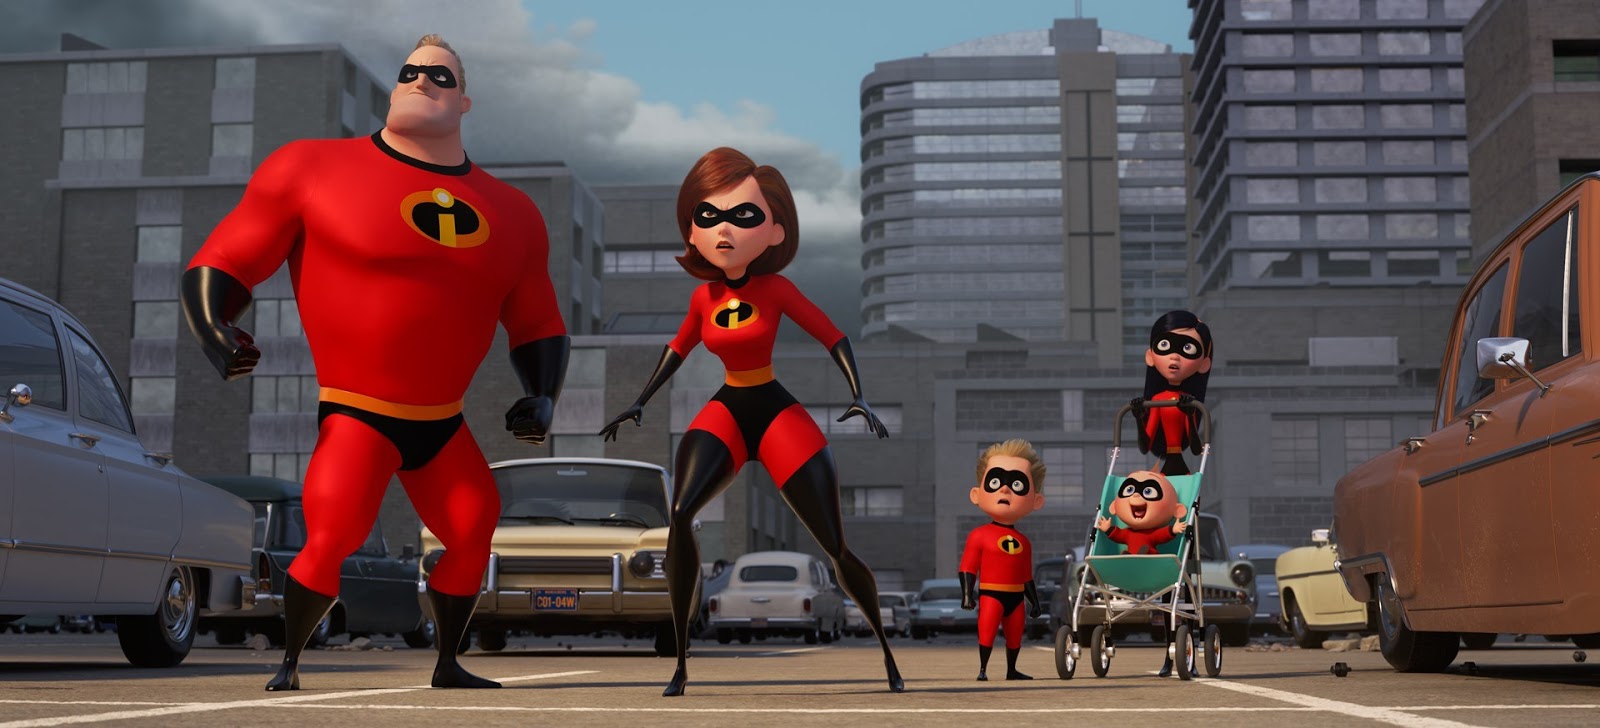 MOVIES: Incredibles 2 - Review